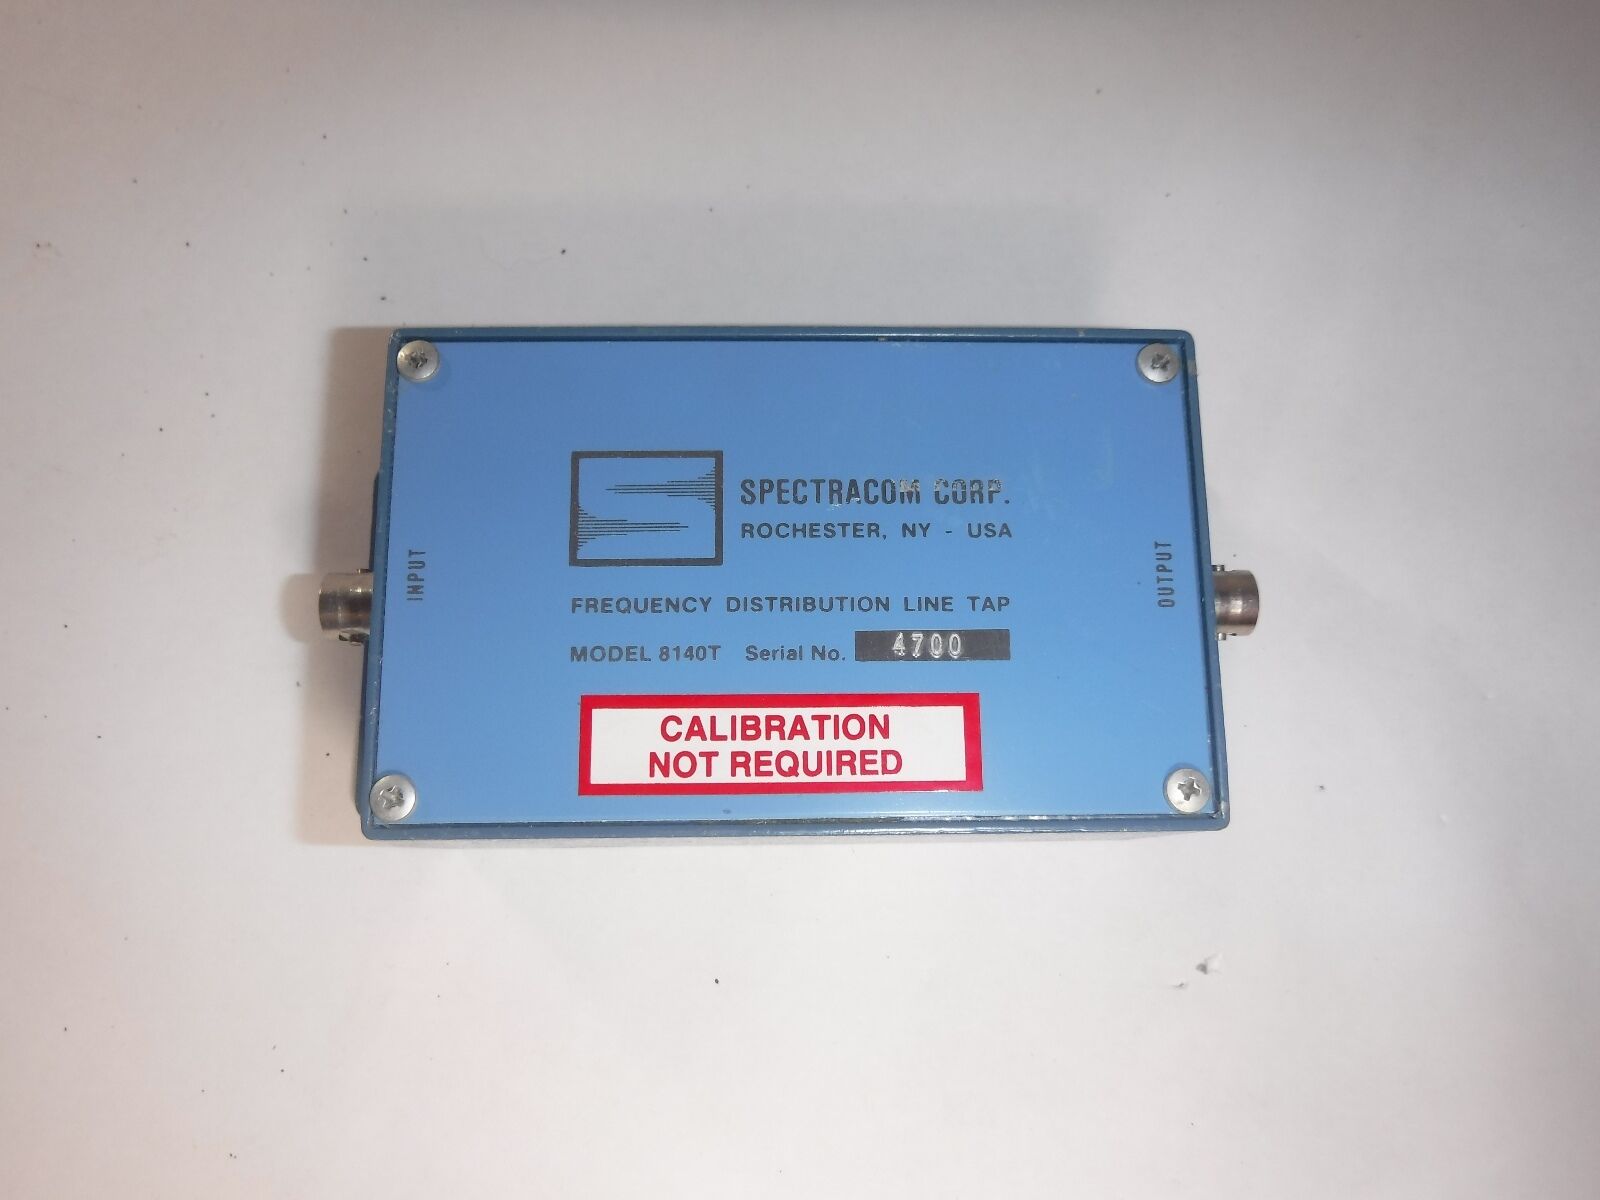 Spectracom Corp. Model 8140T Frequency Distribution Line Tap